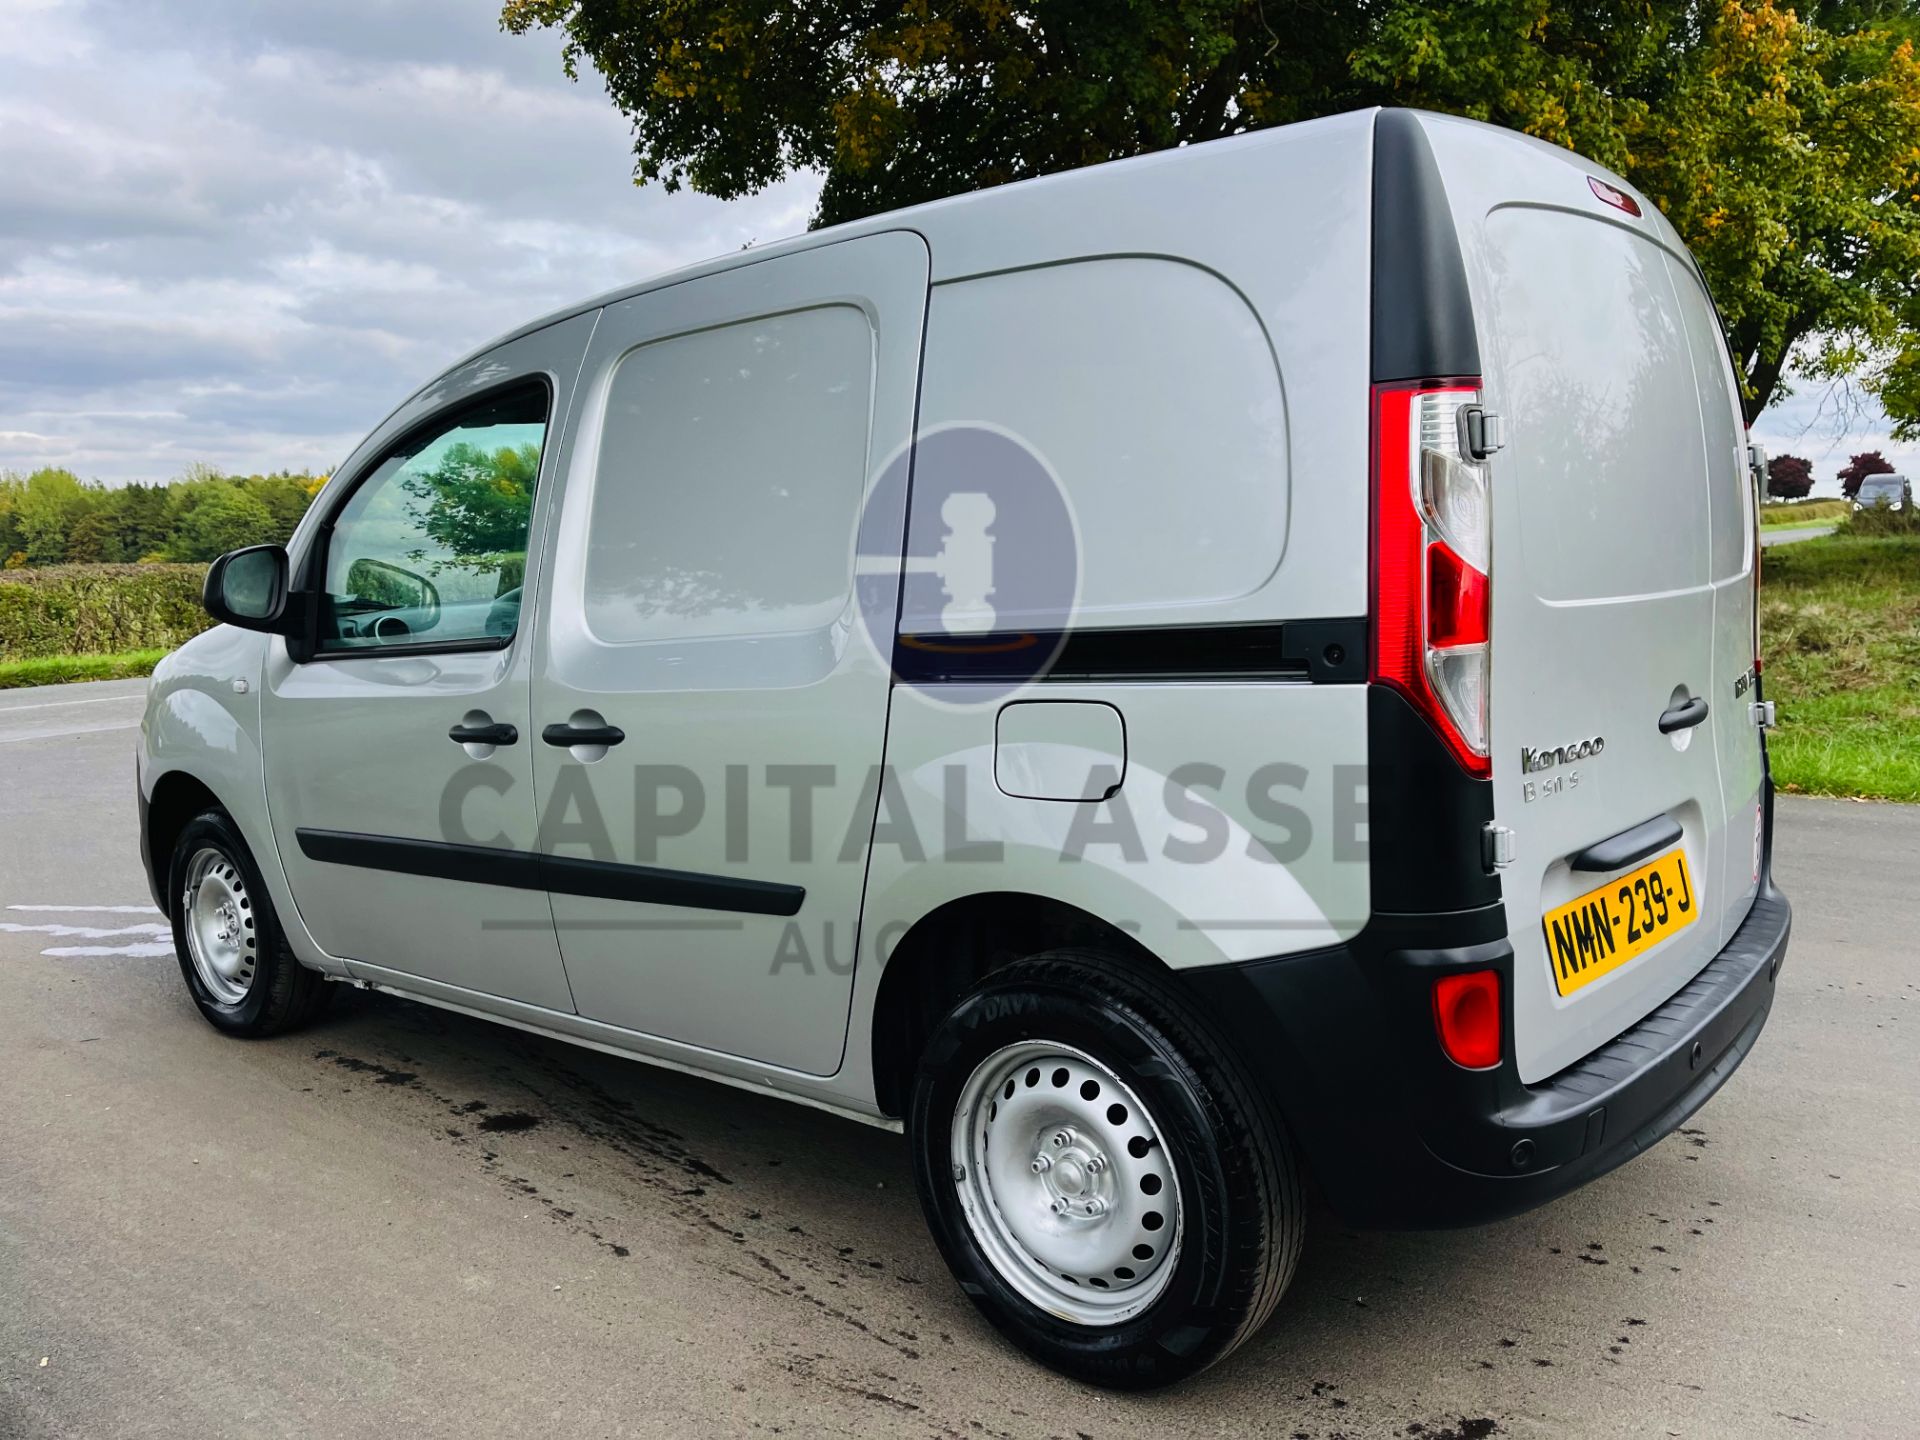 (ON SALE) RENAULT KANGOO 1.5DCI "BUSINESS EDITION" FSH (18 YEAR) EURO (AC) ELEC PACK TWIN SIDE DOORS - Image 9 of 22